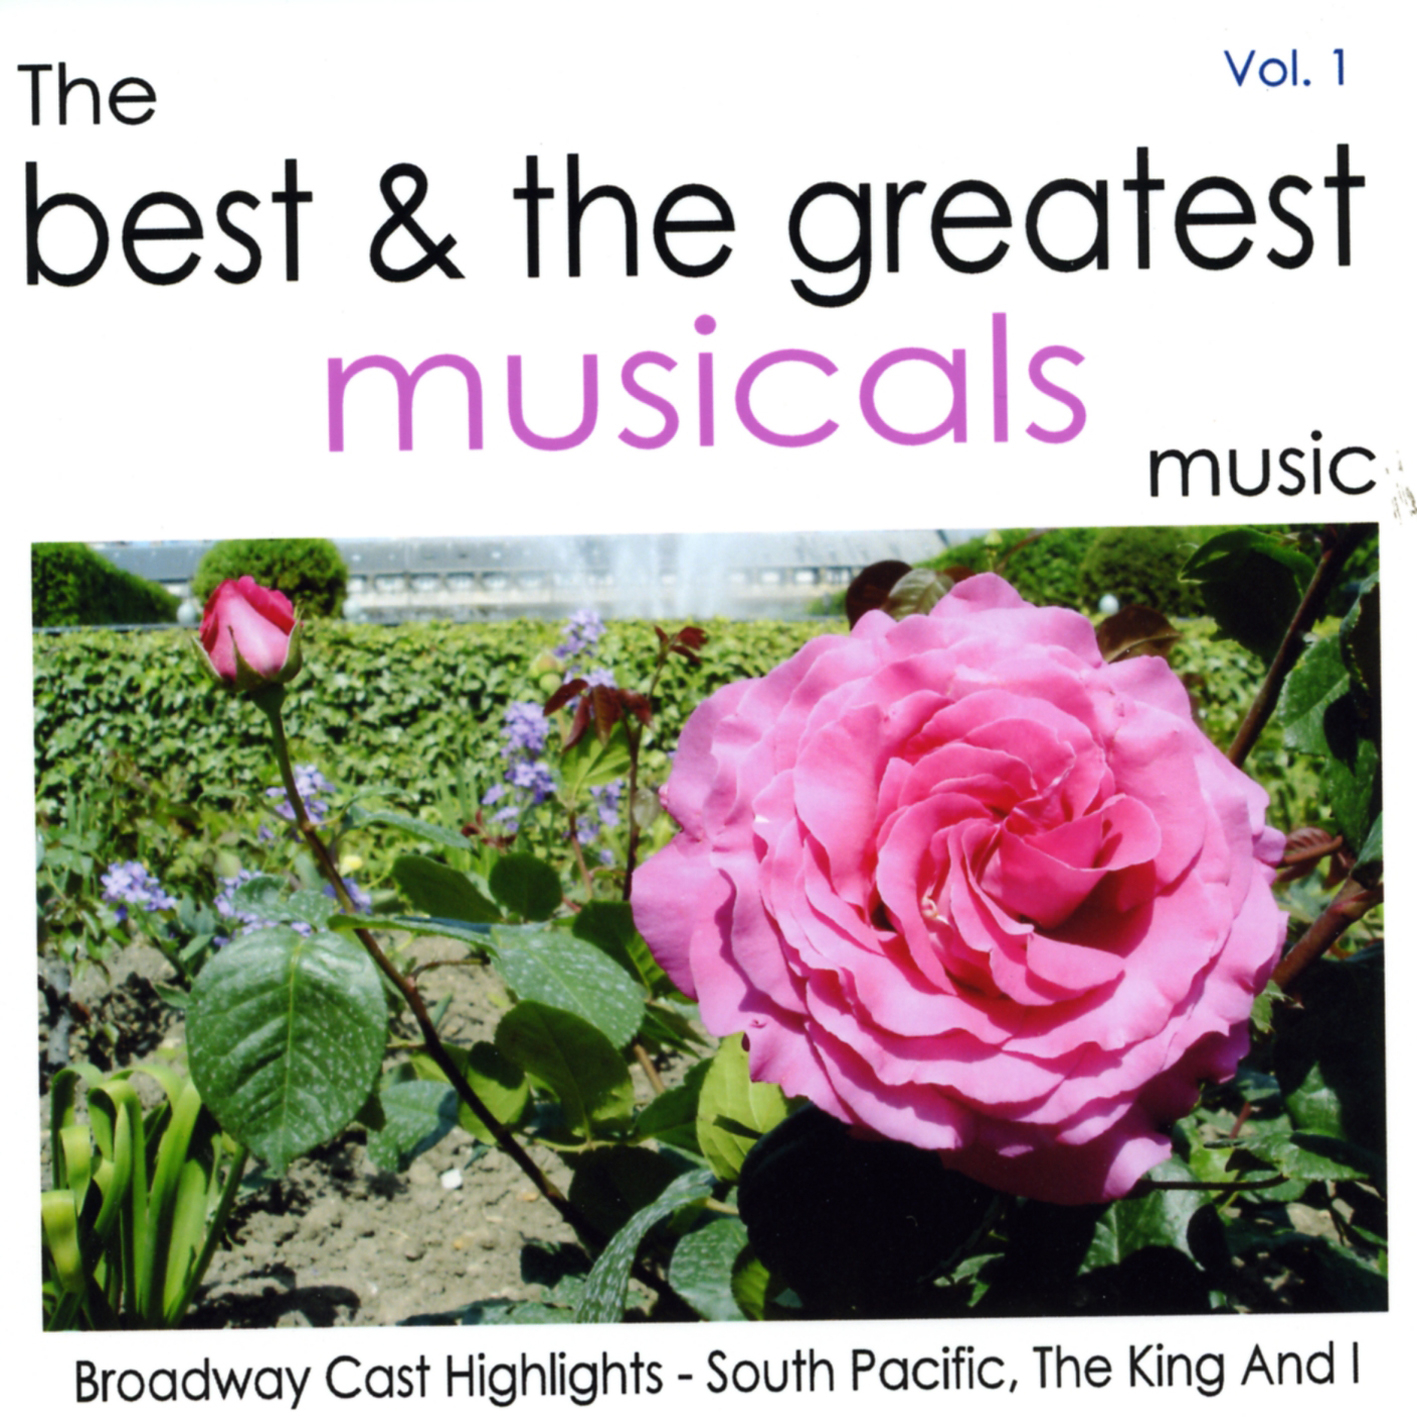 The Best & The Greatest Musicals Vol.1